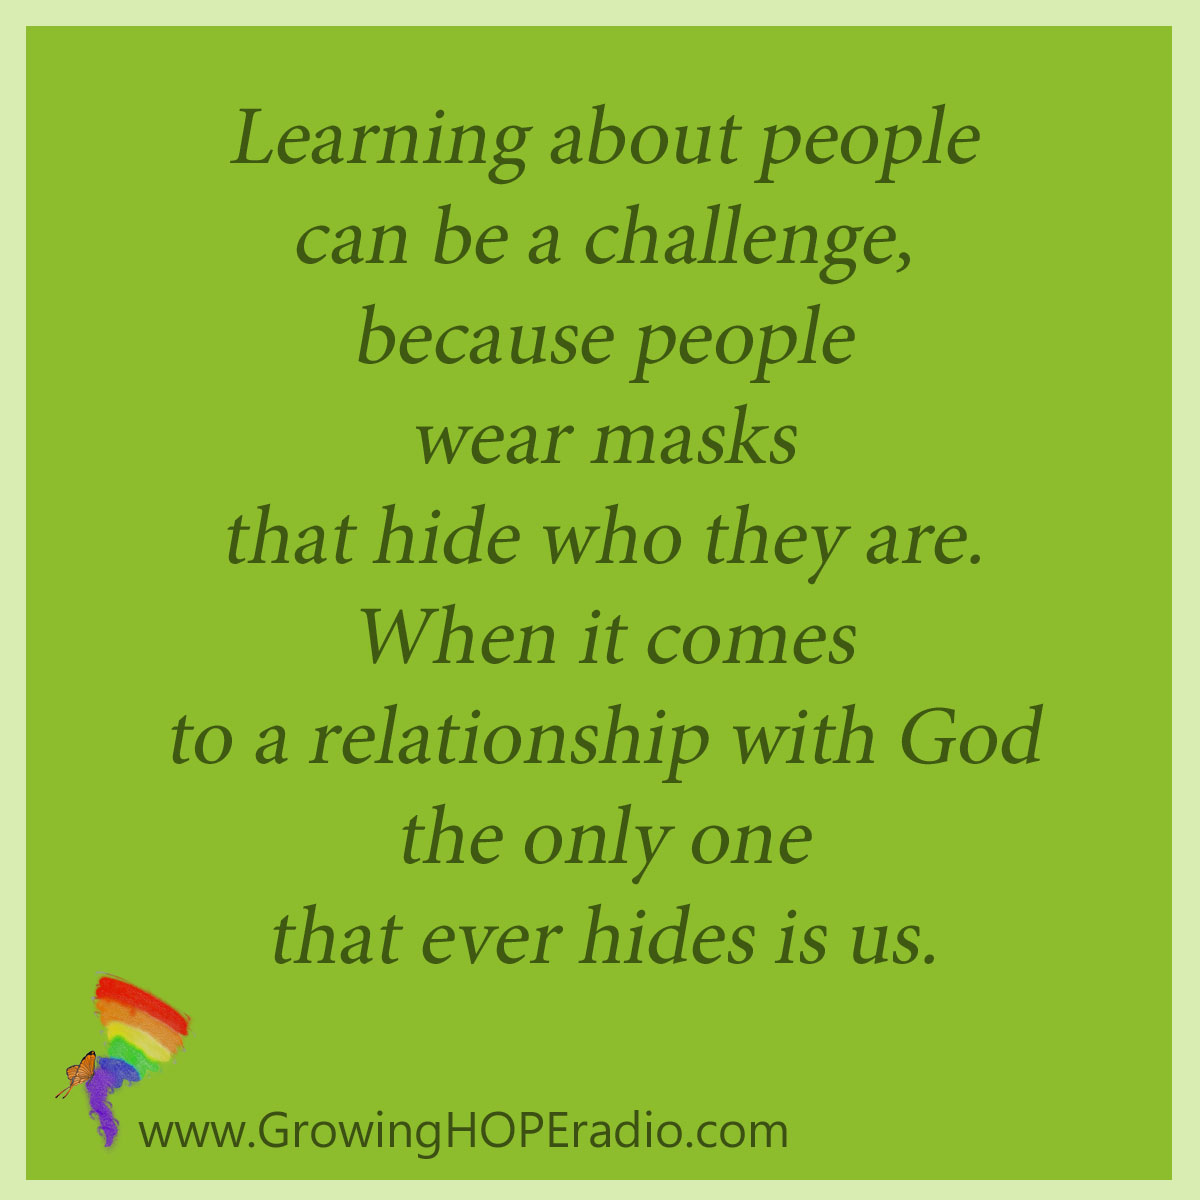 Growing HOPE Daily quote - relationship with God